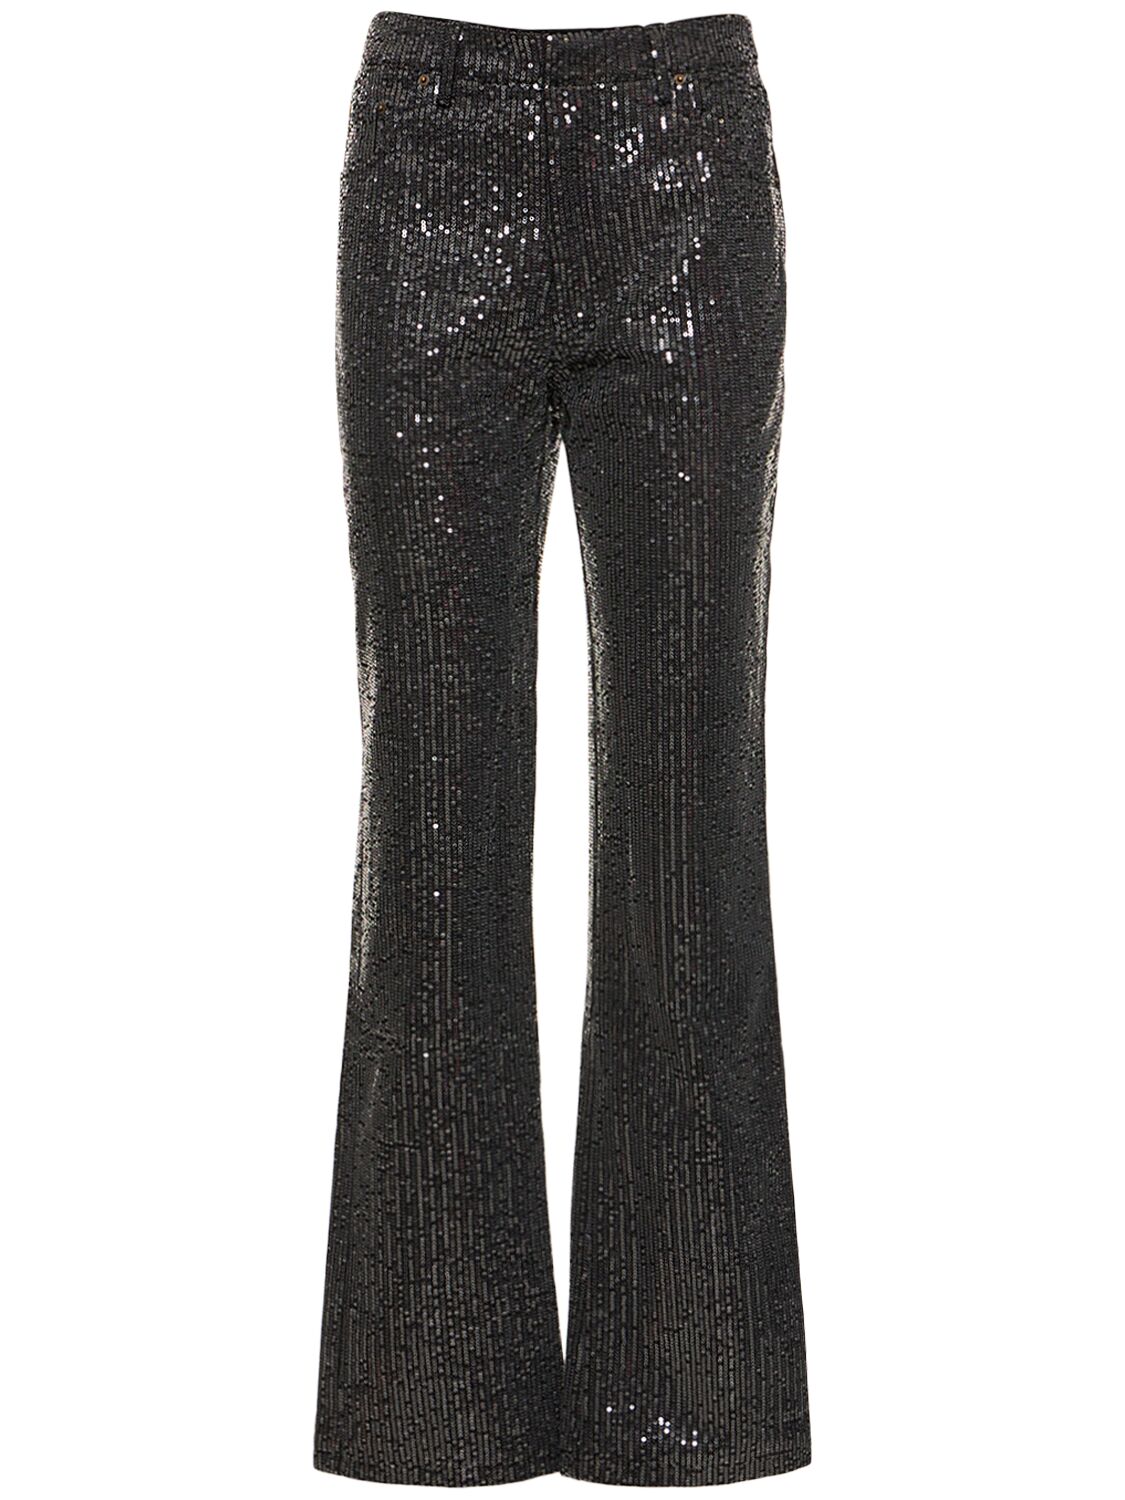 Sequined Twill Pants